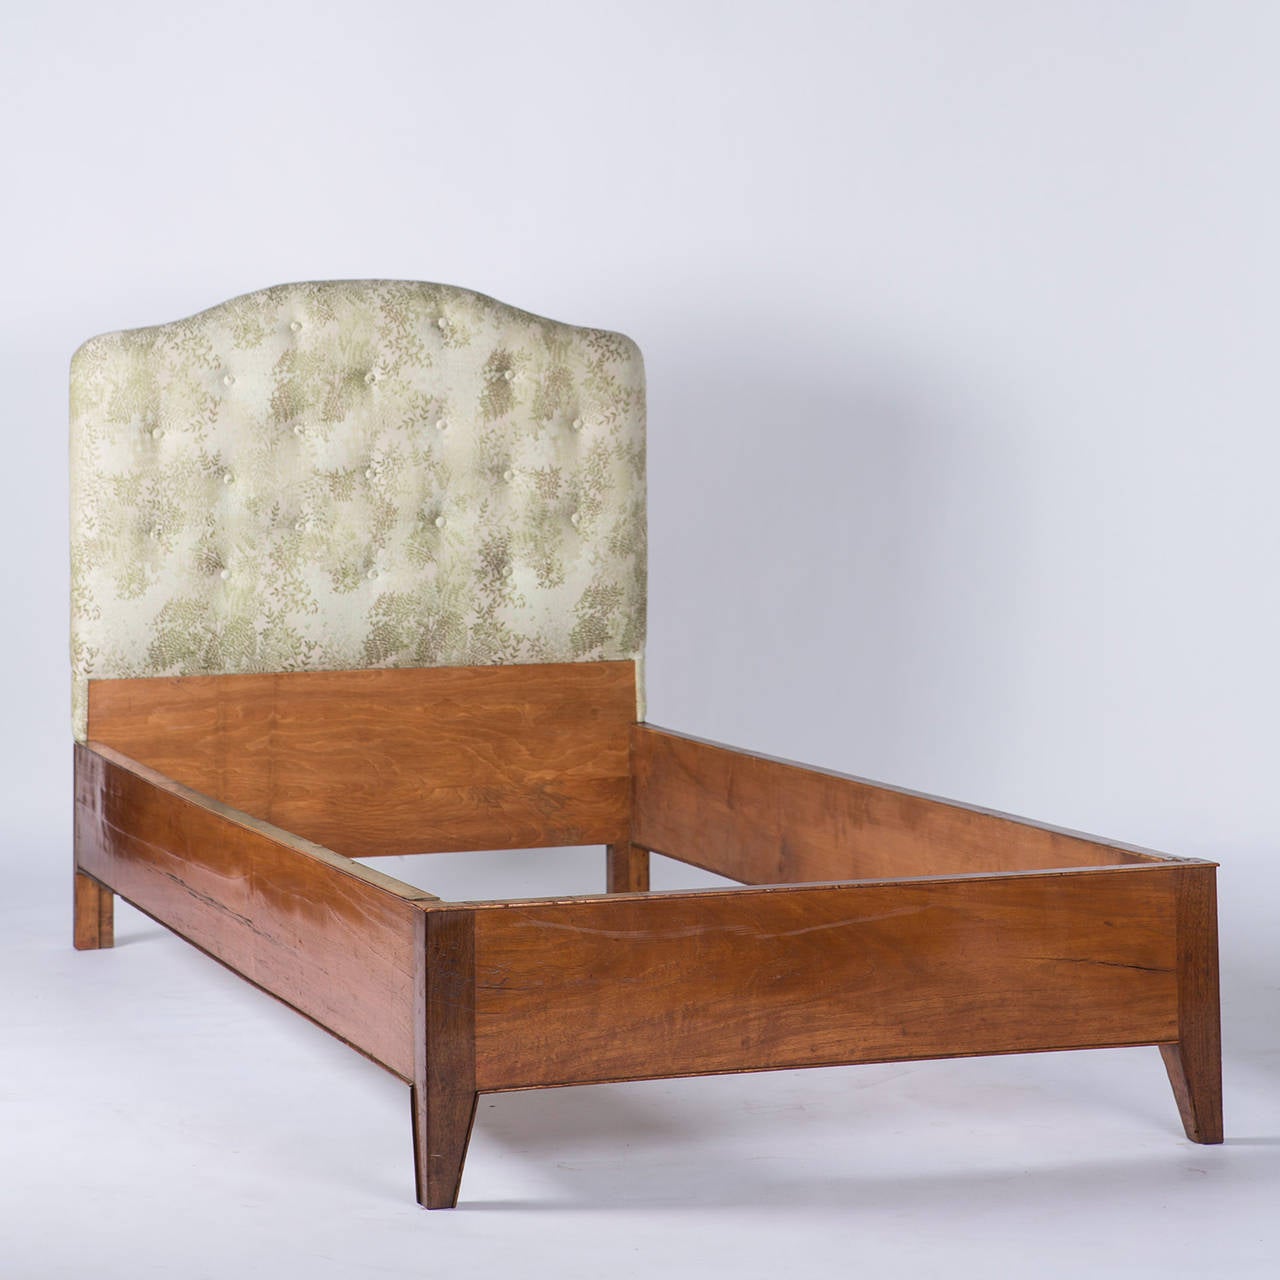 Italian Set of Two Wood Single Beds by Gio Ponti, Italy, 1940s For Sale